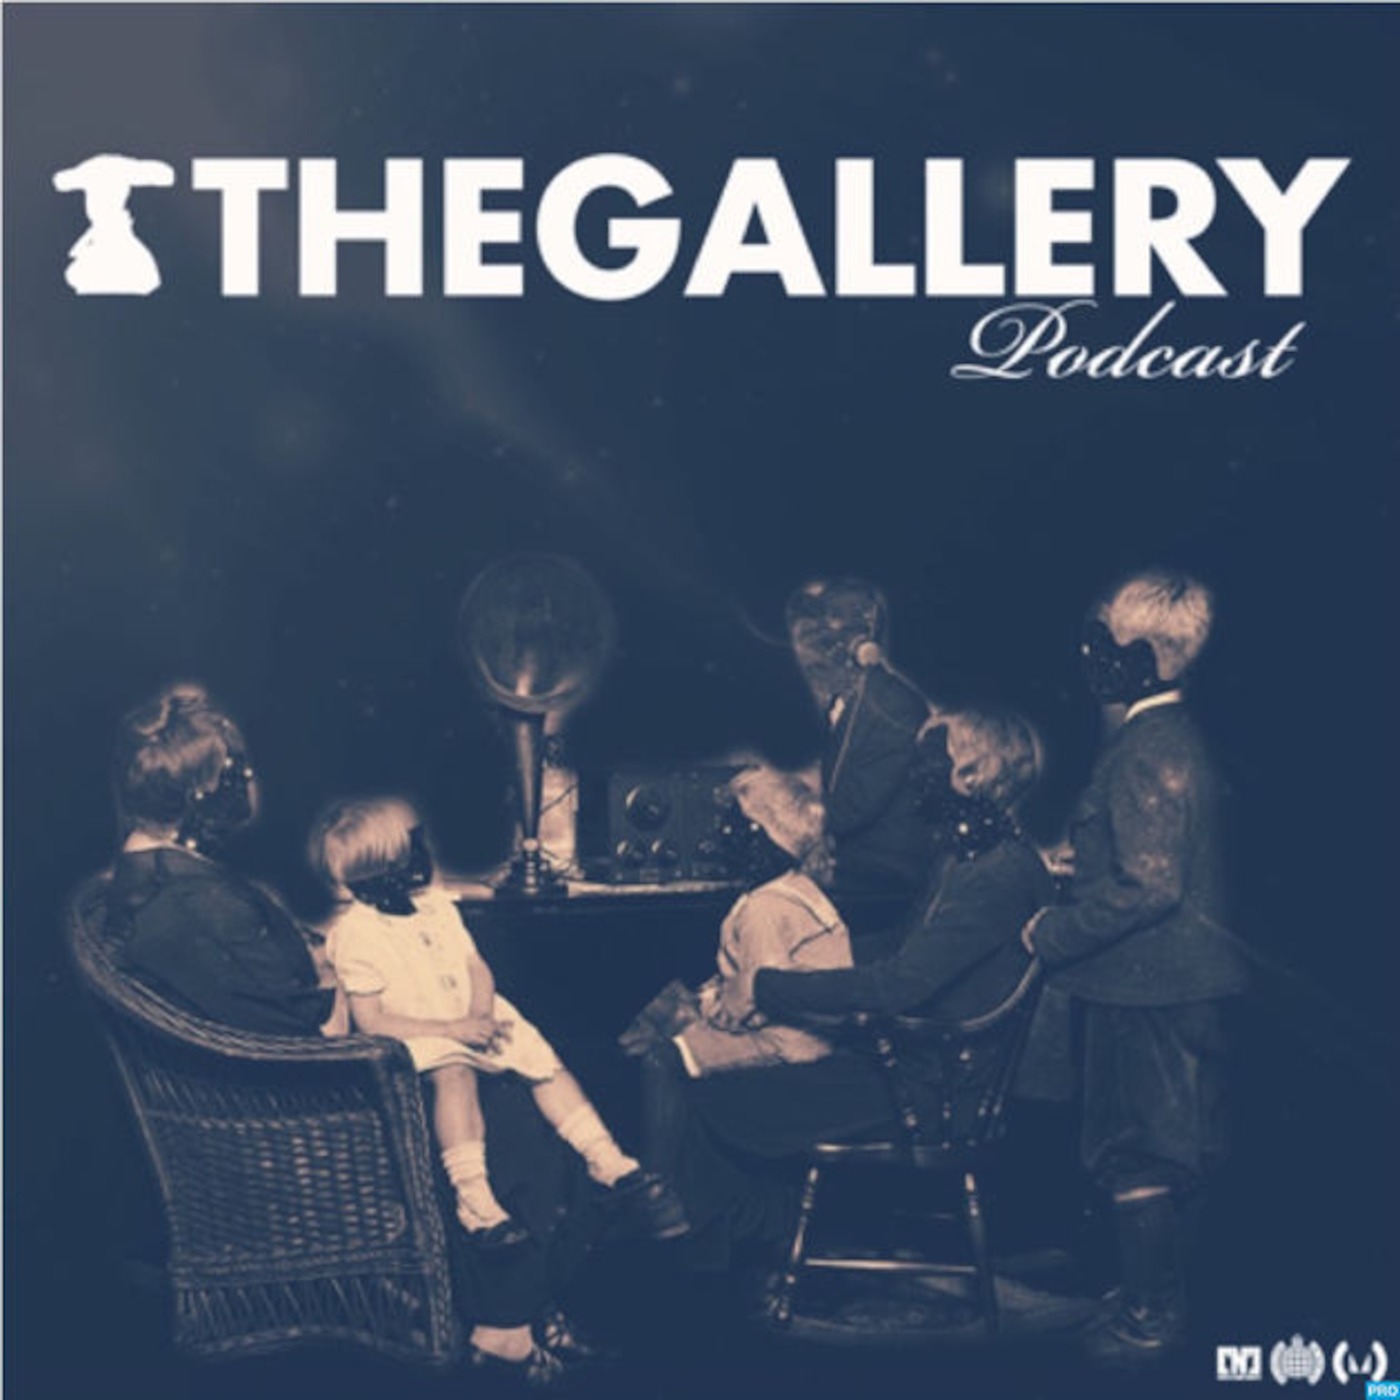 The Gallery Podcast Episode 188 W/ Tristan D + Aly & Fila Guest Mix